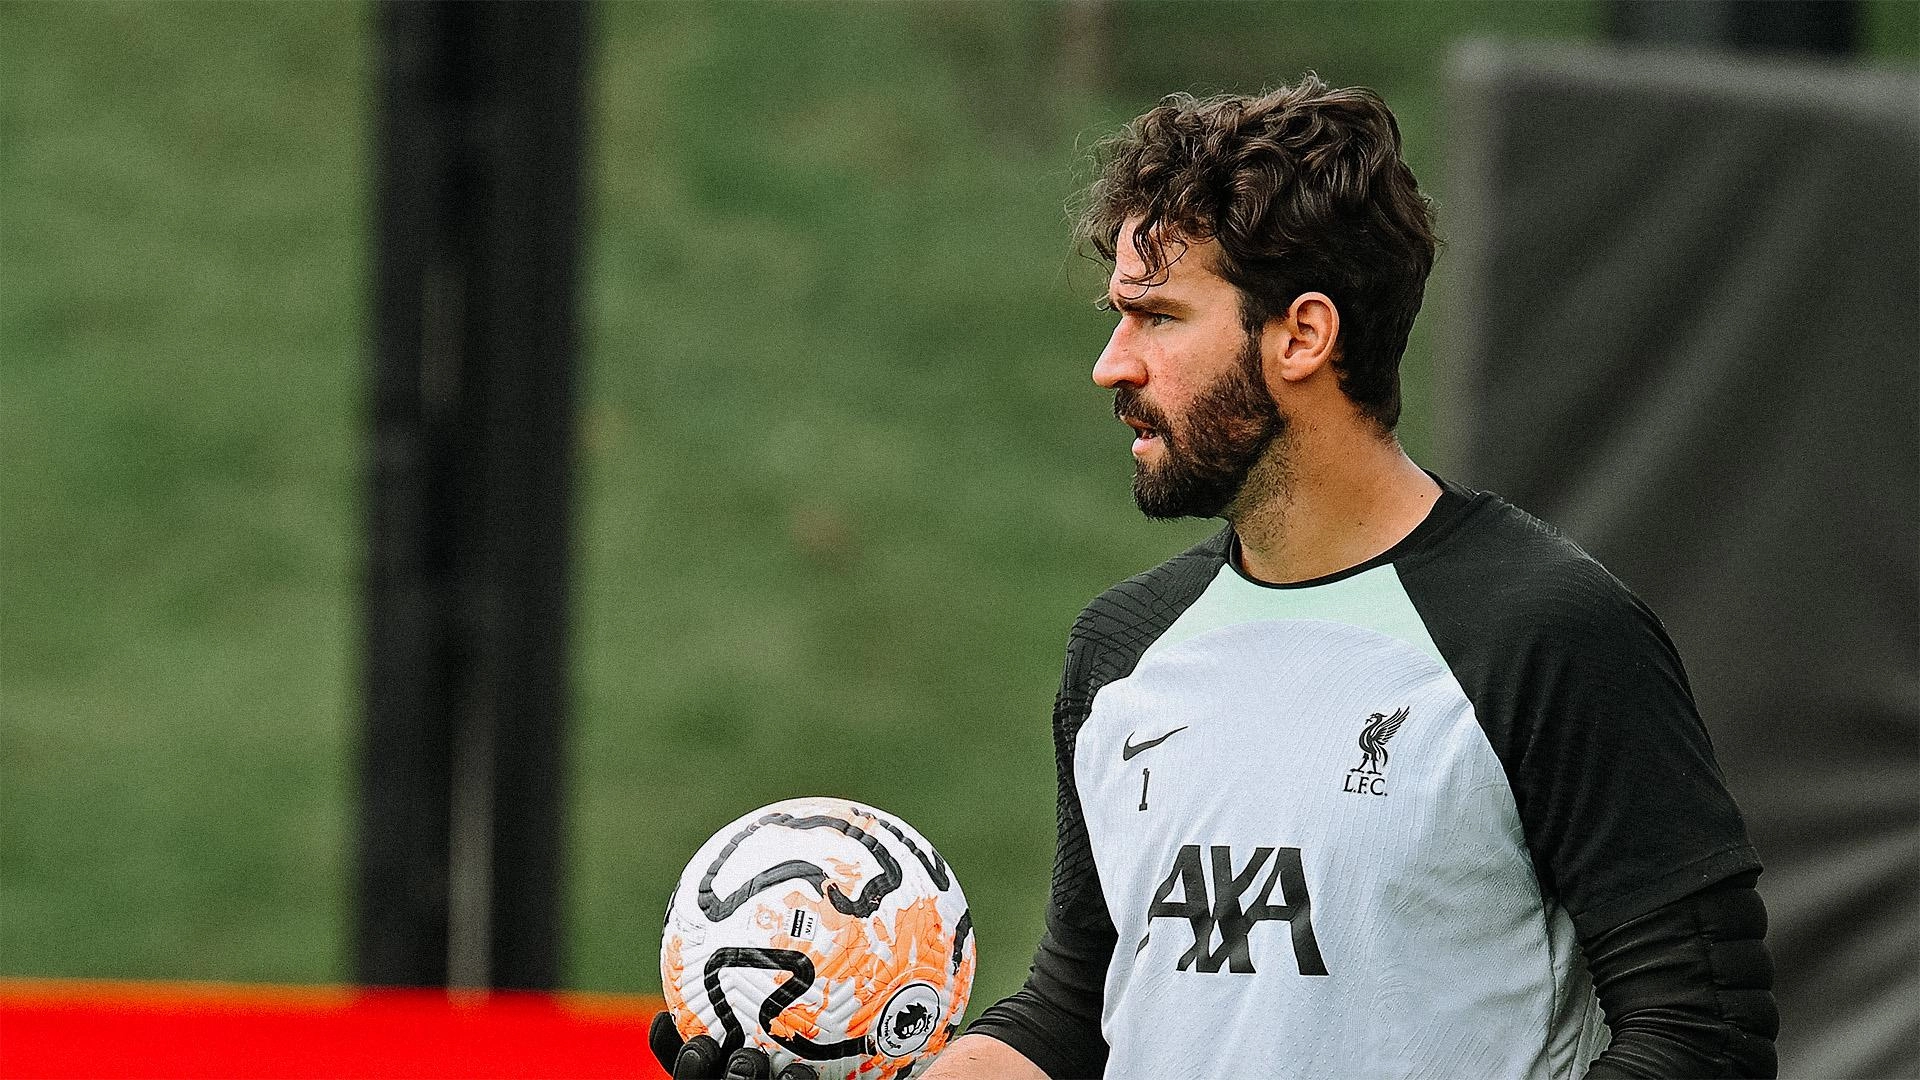 Alisson Becker named in Brazil squad for World Cup qualifiers